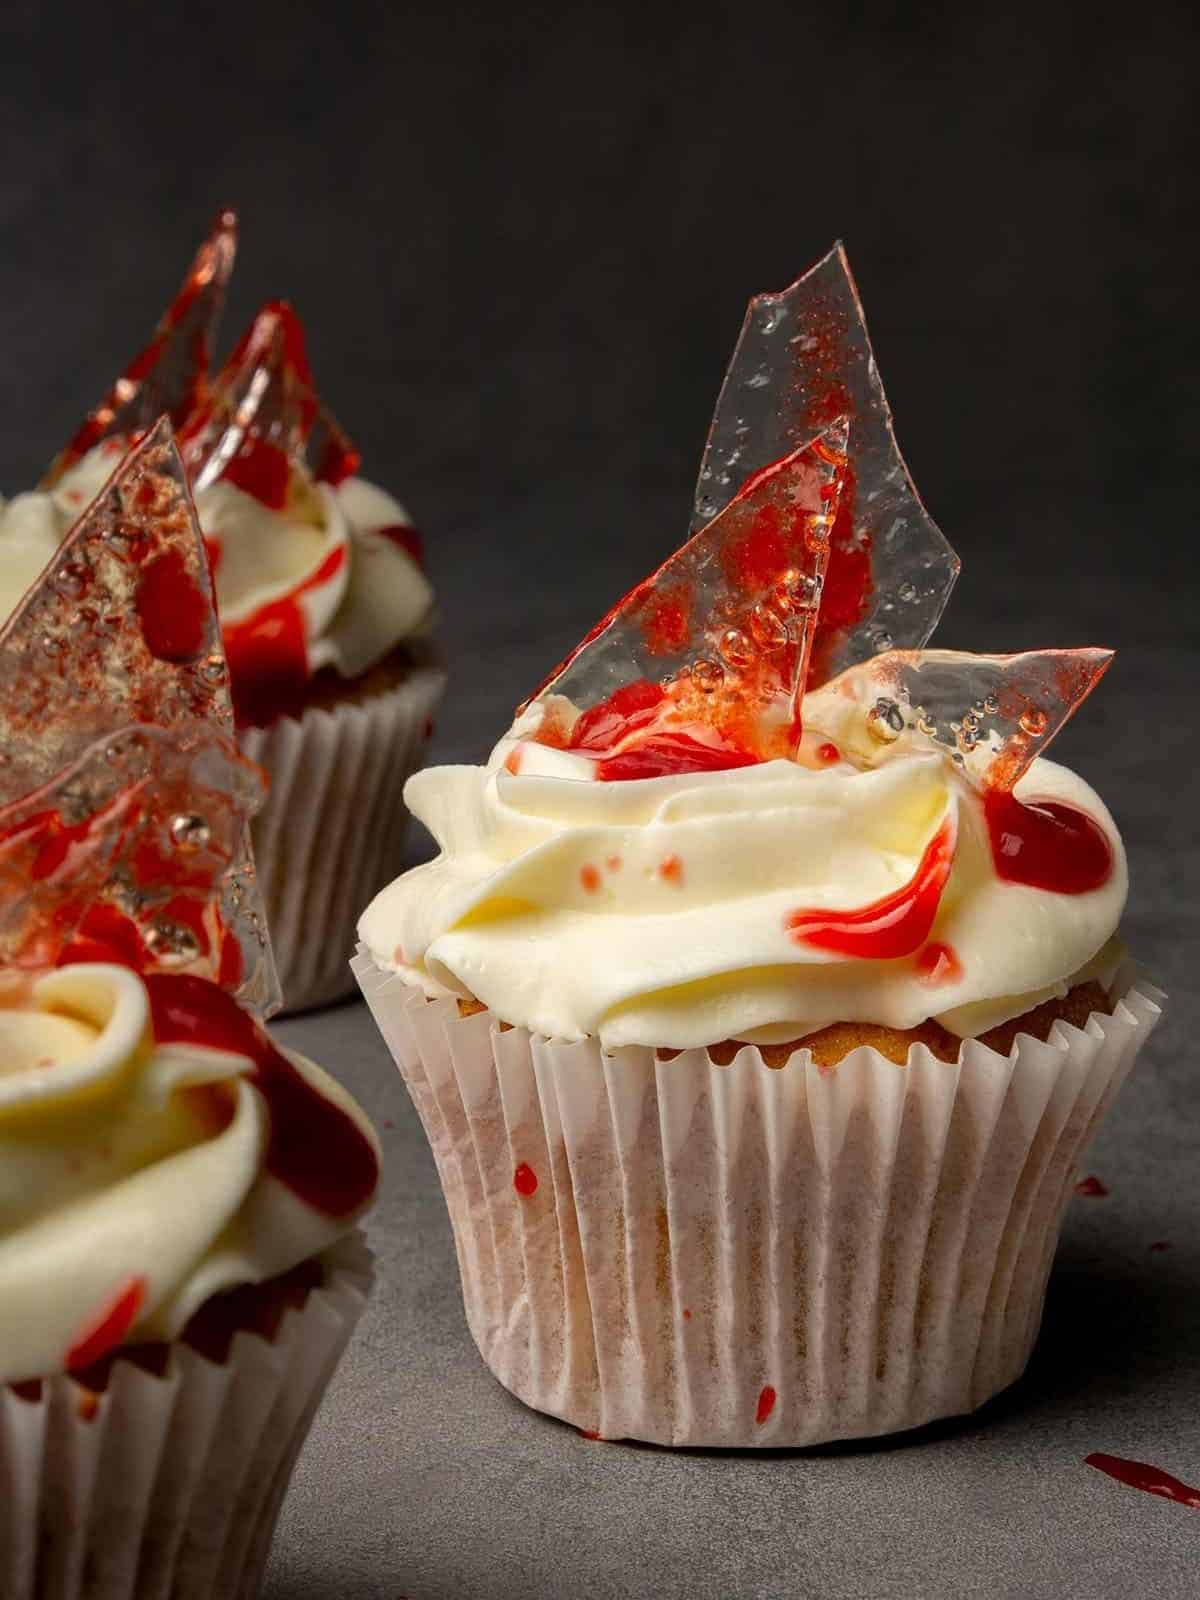 Bloody halloween cupcakes with glass shard candies. 